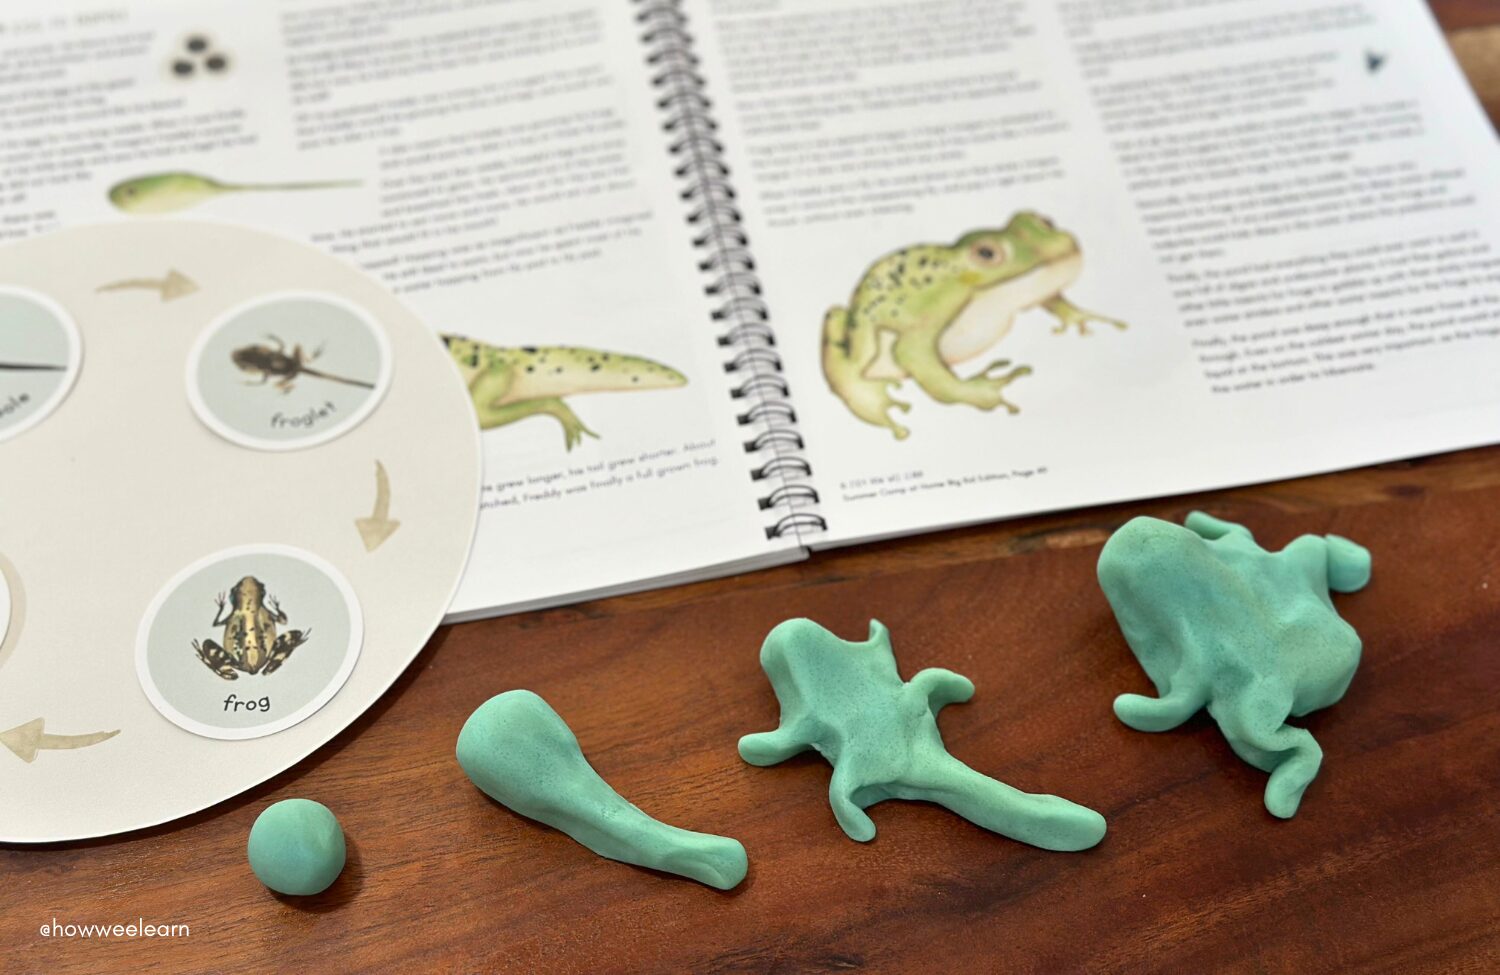 Frog life cycle made out of playdough